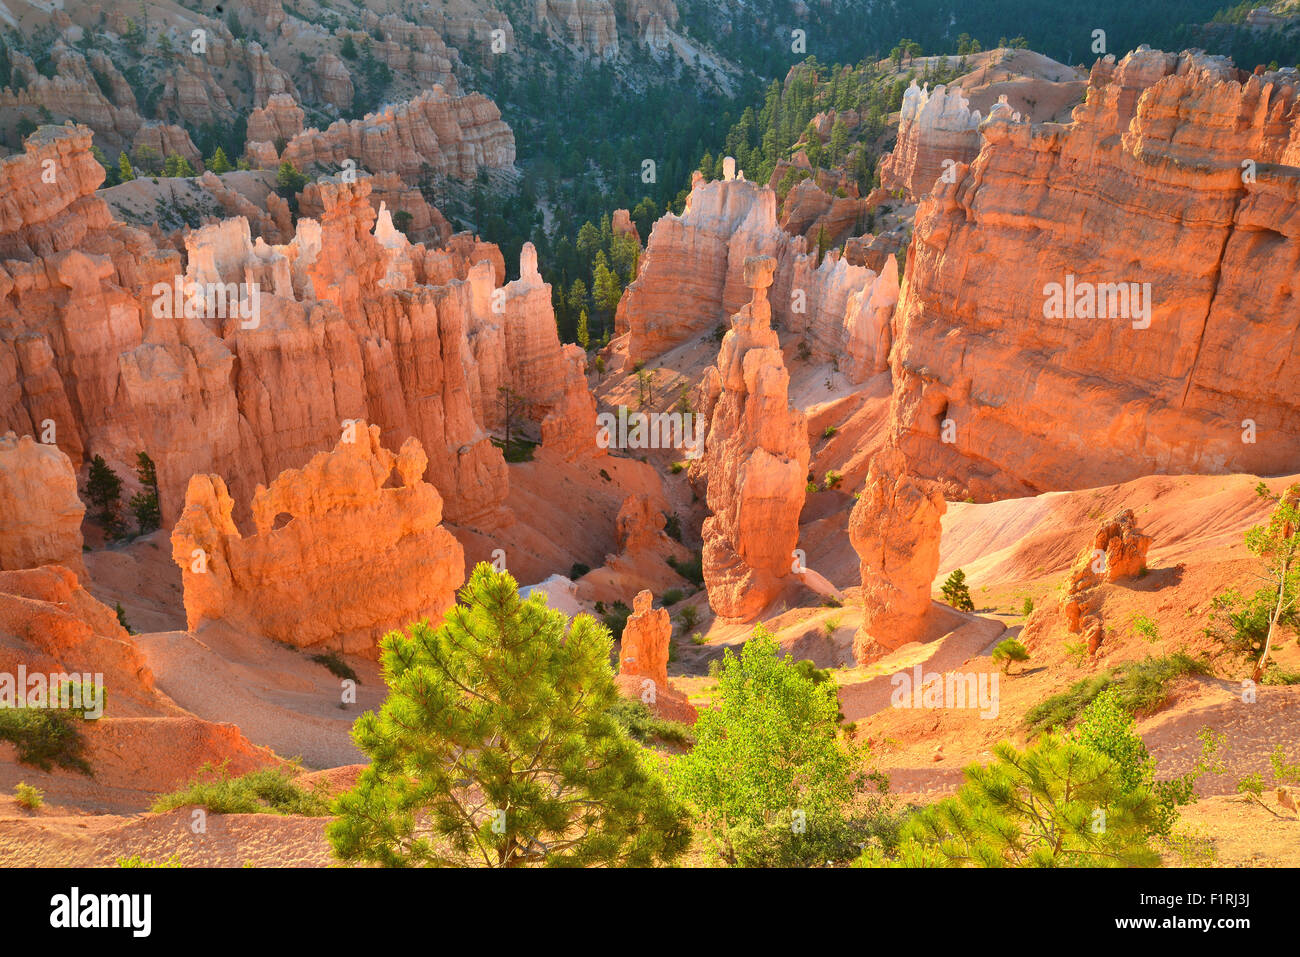 View of Queen's Garden from Navajo Loop Trail below Sunset Point in Bryce Canyon National Park in Southwestern Utah Stock Photo